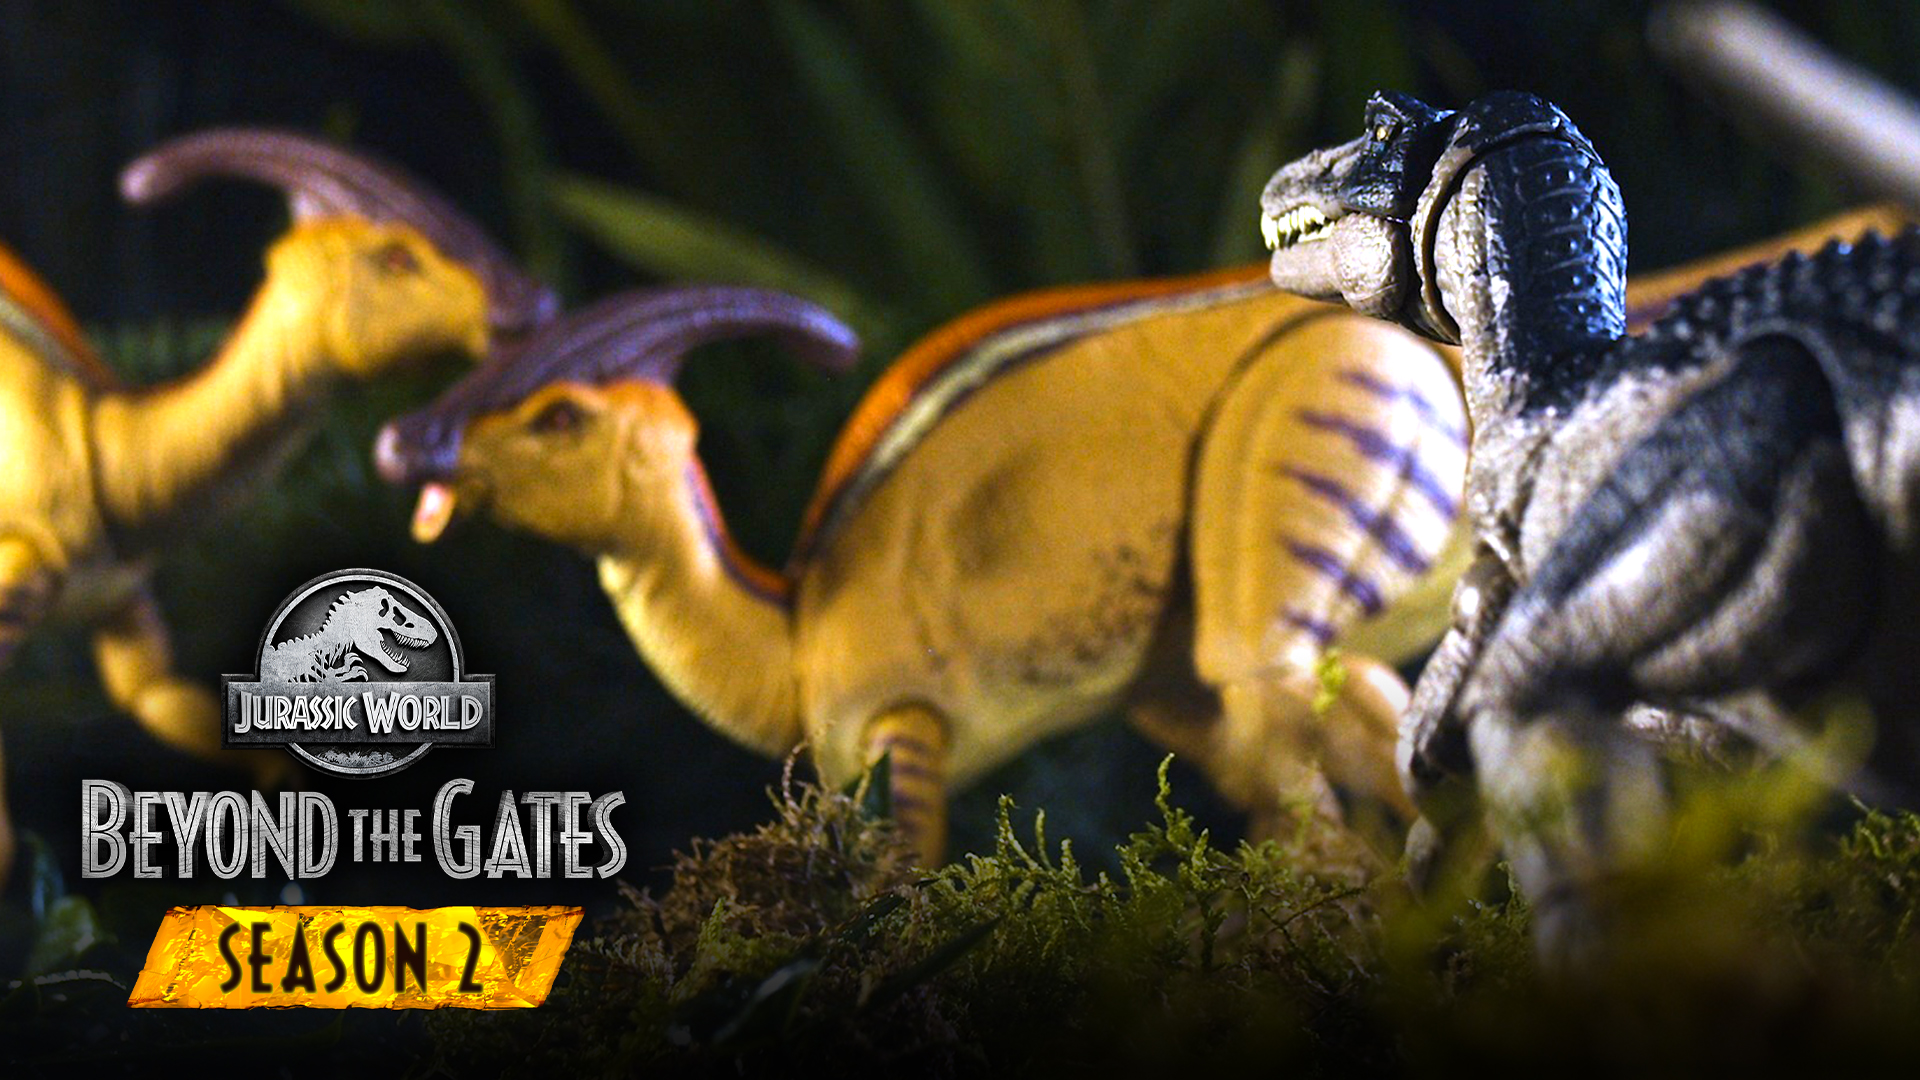 Beyond The Gates Returns with the All-New Jurassic World HAMMOND COLLECTION!